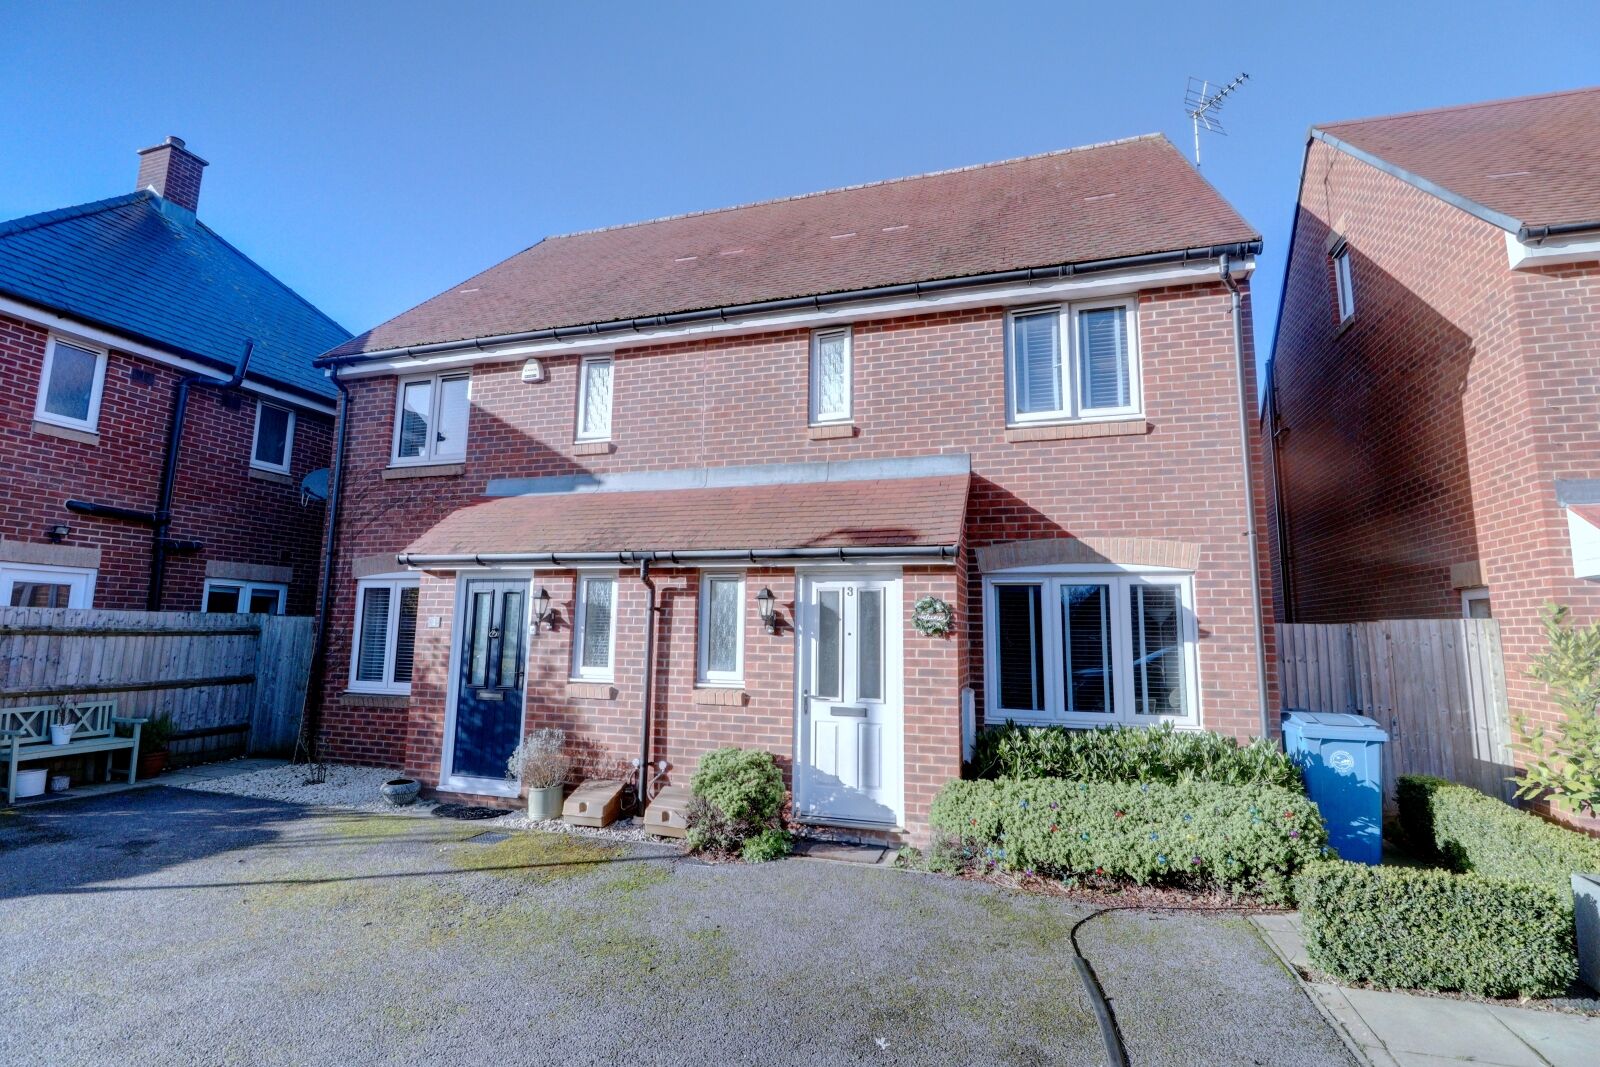 3 bedroom semi detached house to rent, Available from 01/04/2024 Scholars Rise, Stokenchurch, HP14, main image